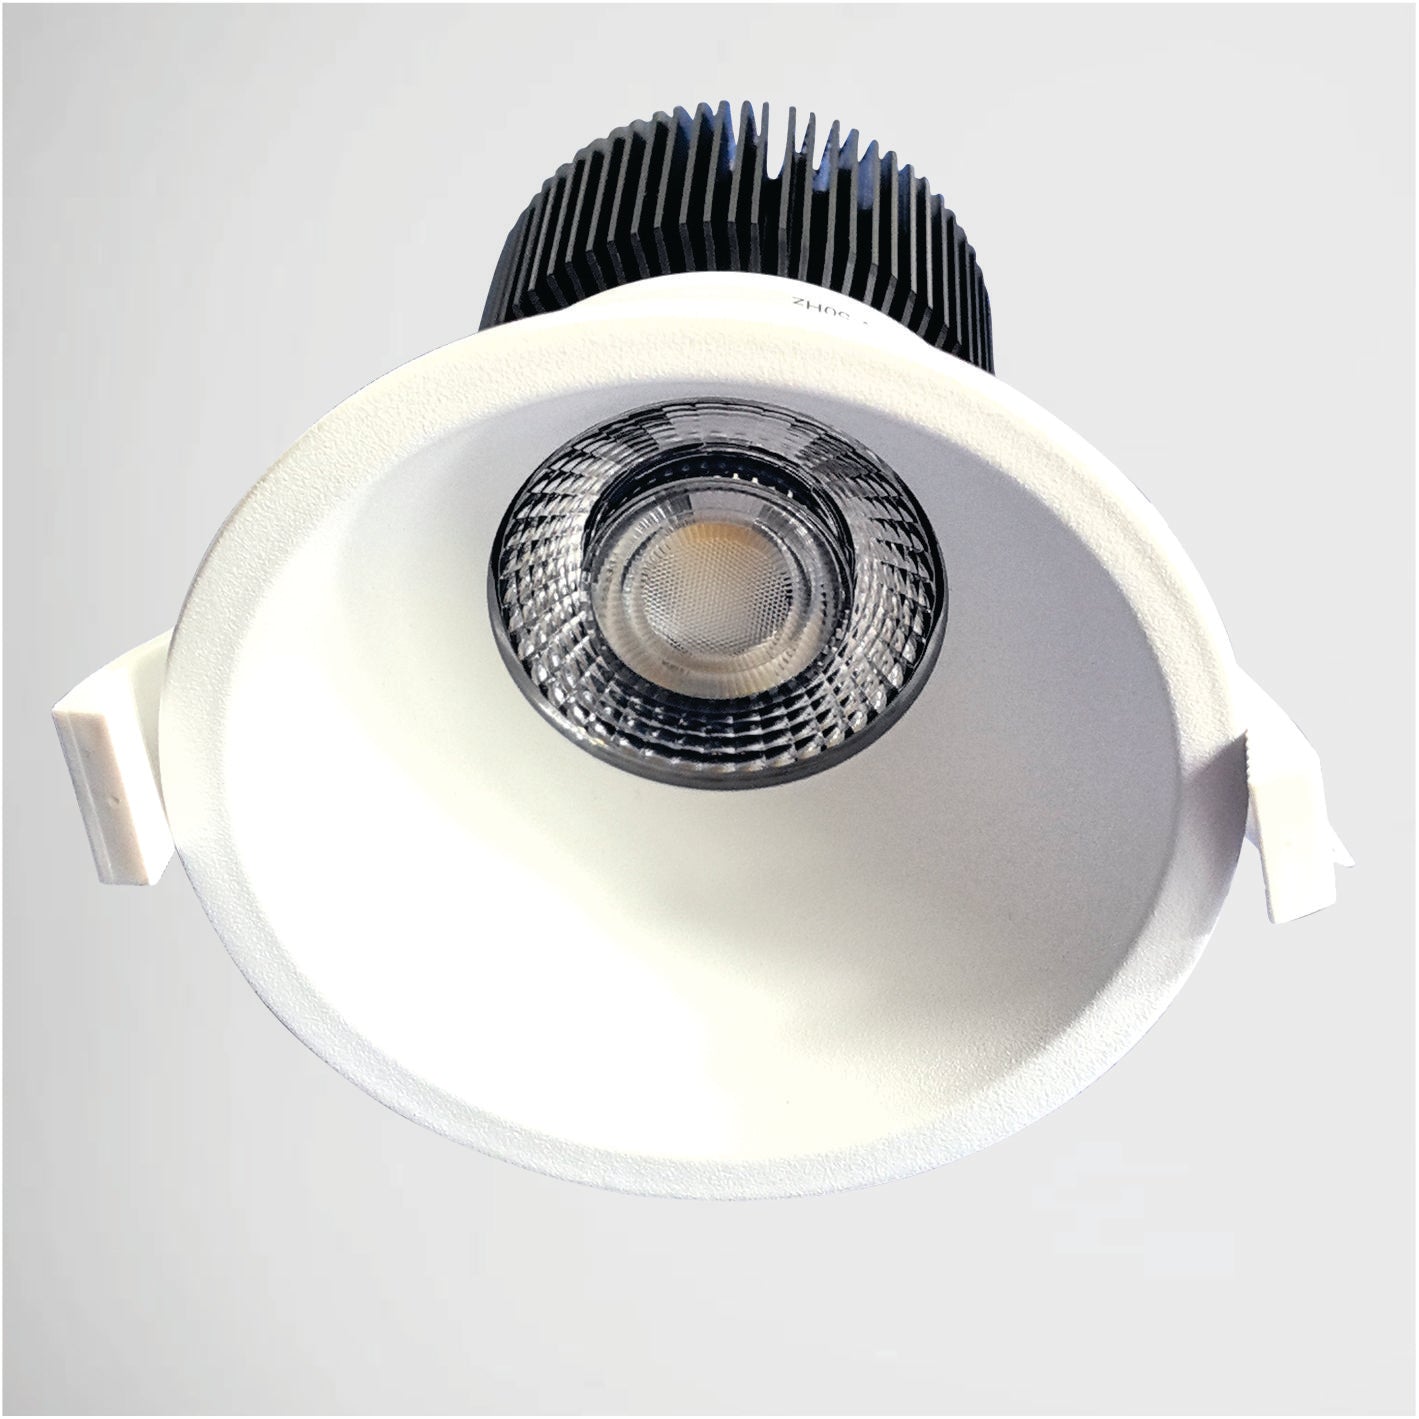 Jaguar 10W 1100lm Deep Baffle Recessed LED Downlight Tri-Color Dimmable White